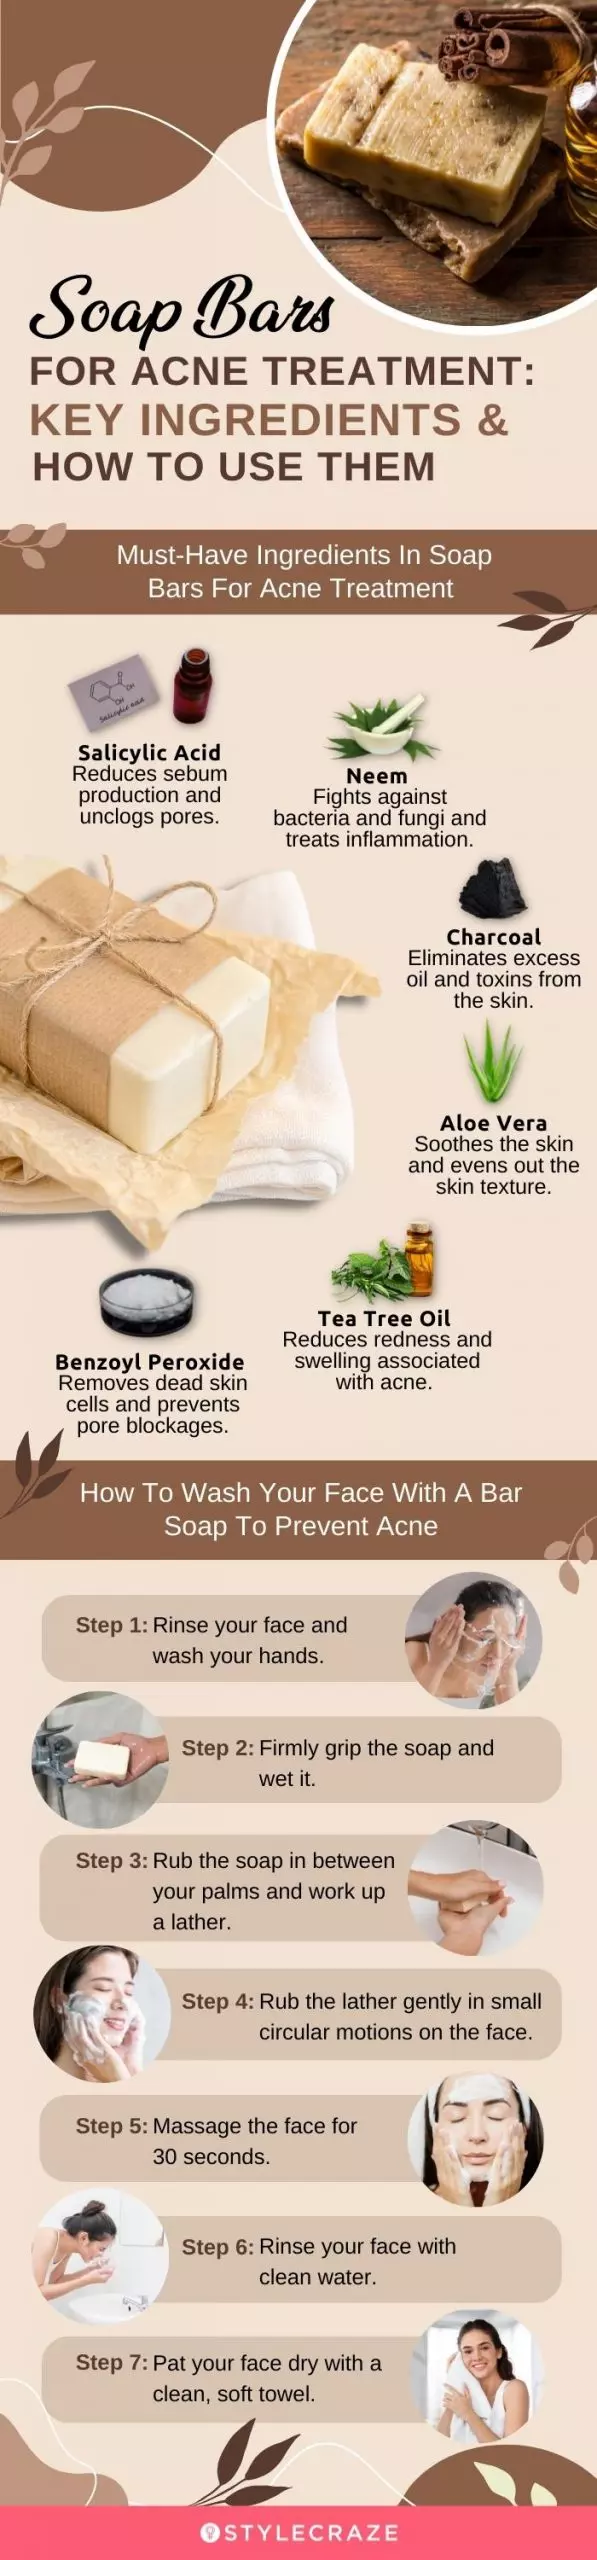 Soap Bars For Acne Treatment